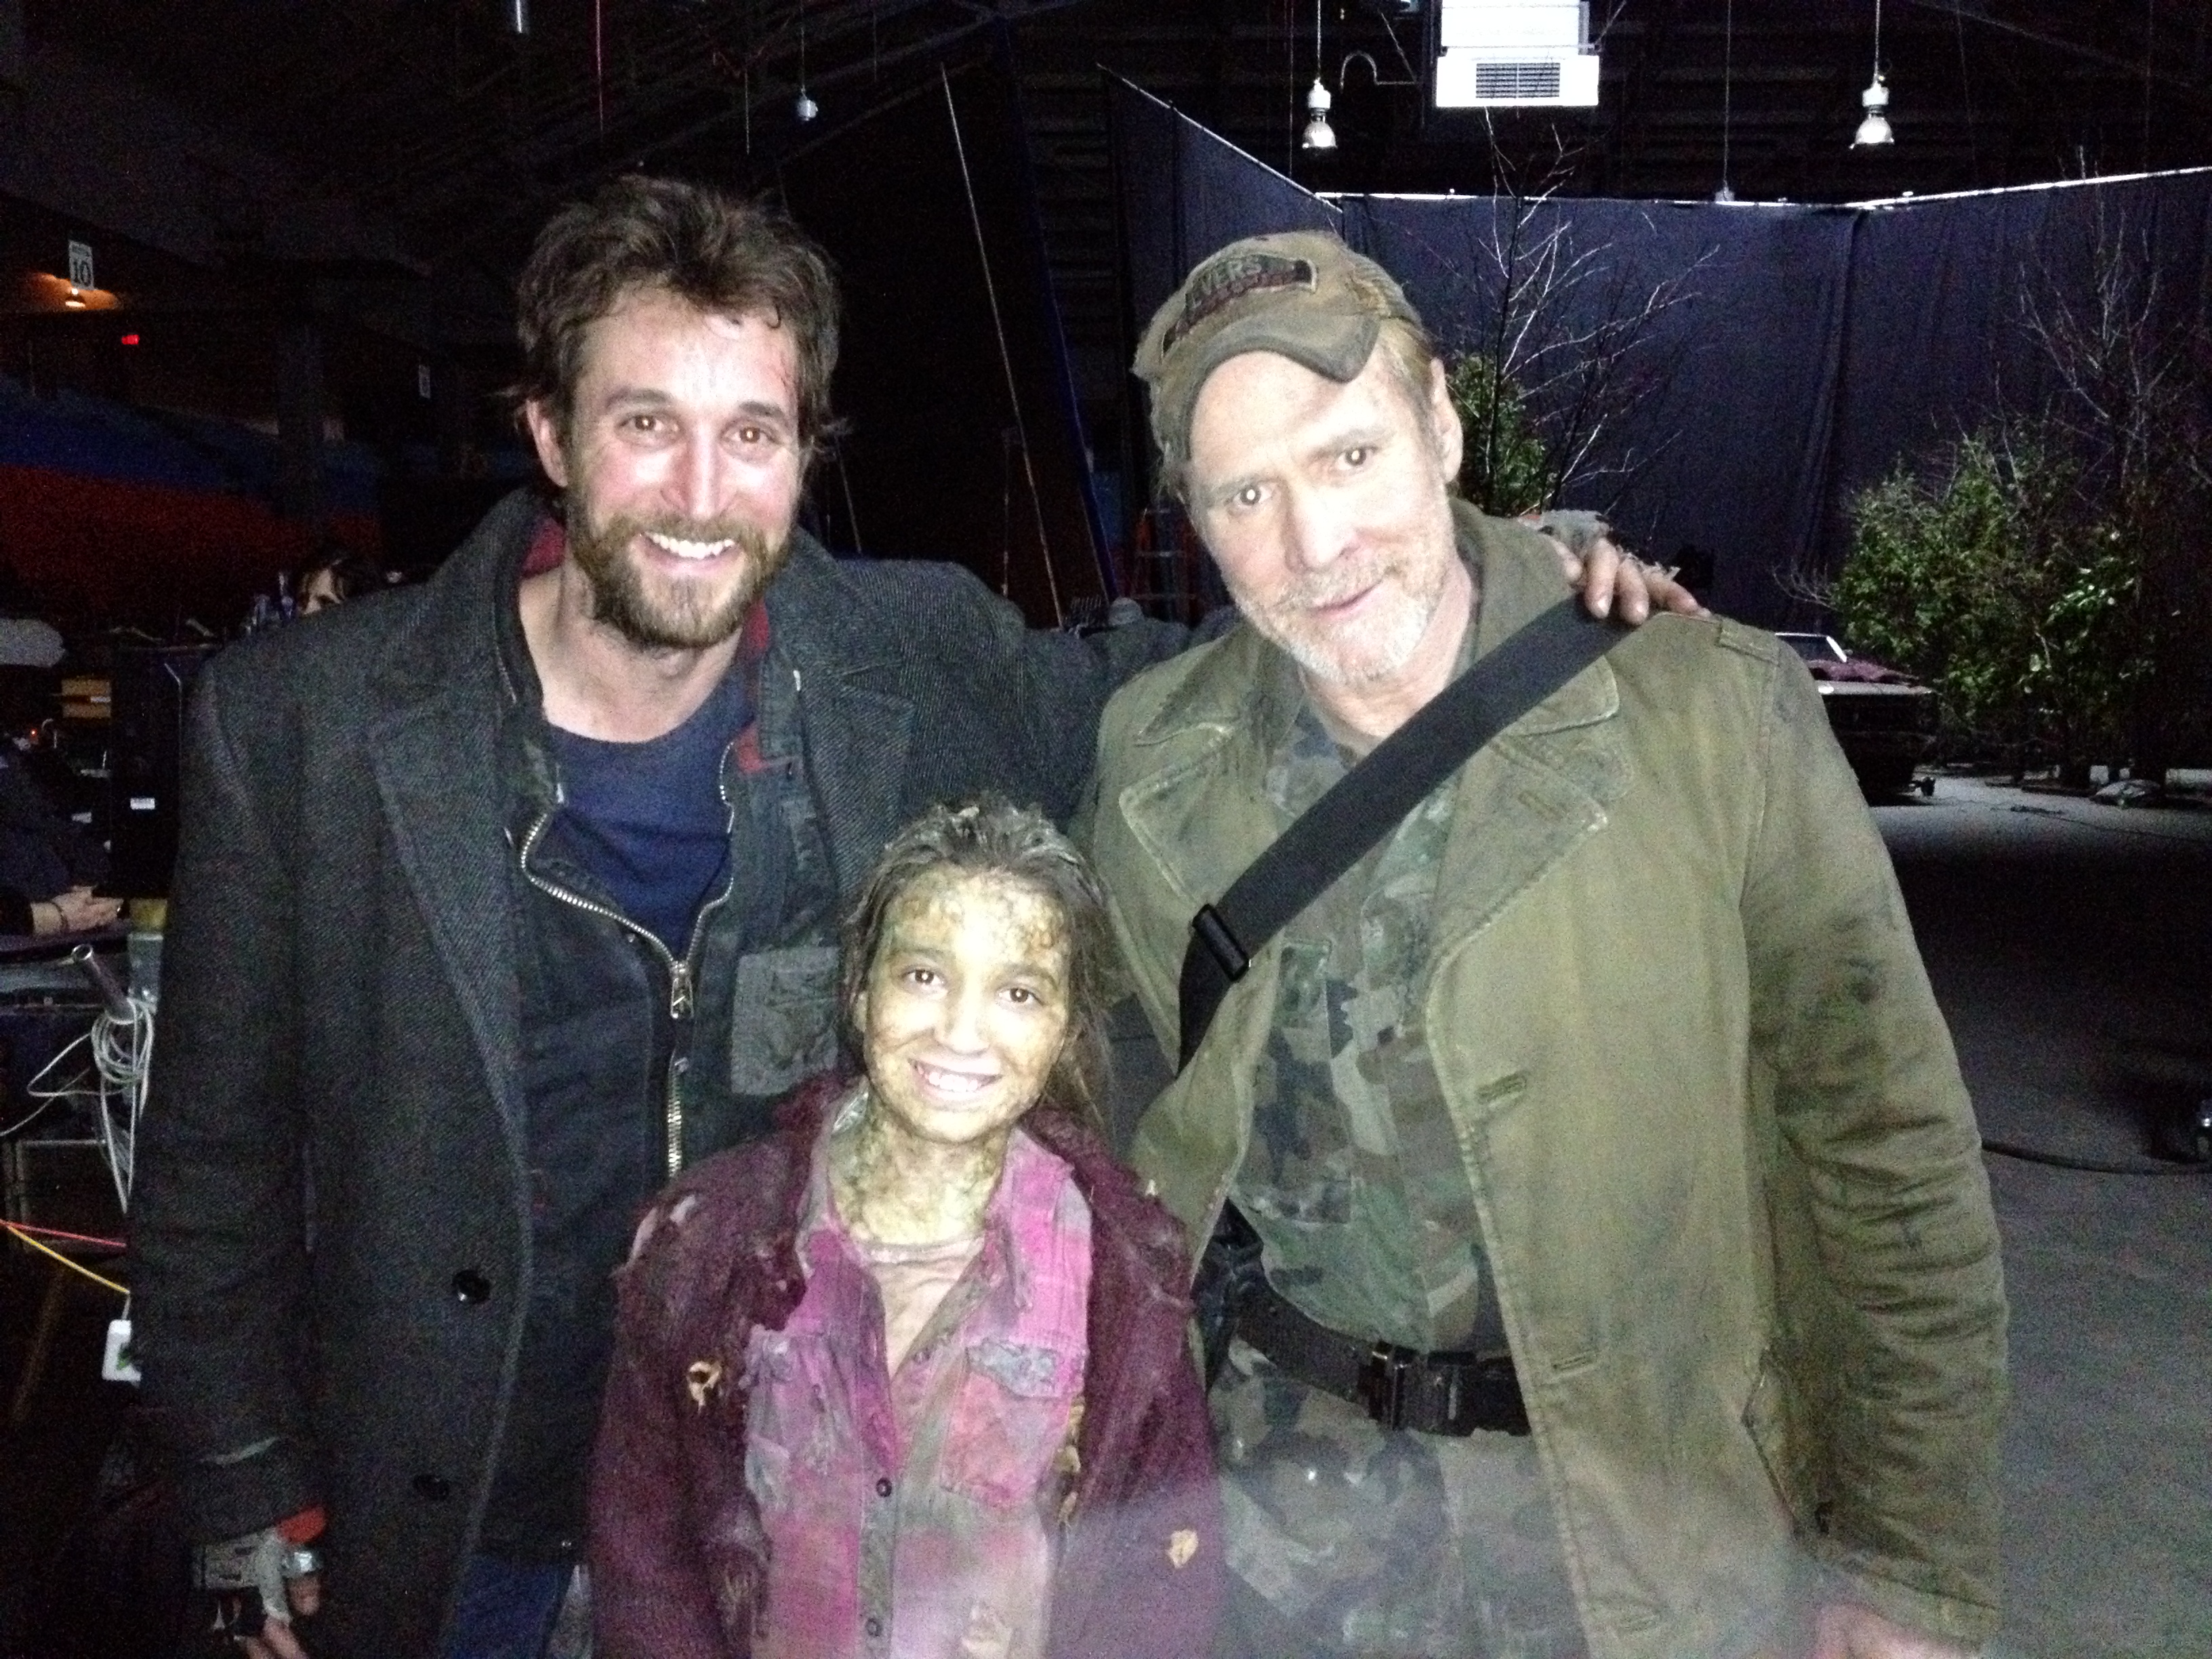 Olivia Steele Falconer with Noah Wyle & Will Patton on Falling Skies / Season 2 Episode 8 / Death March.